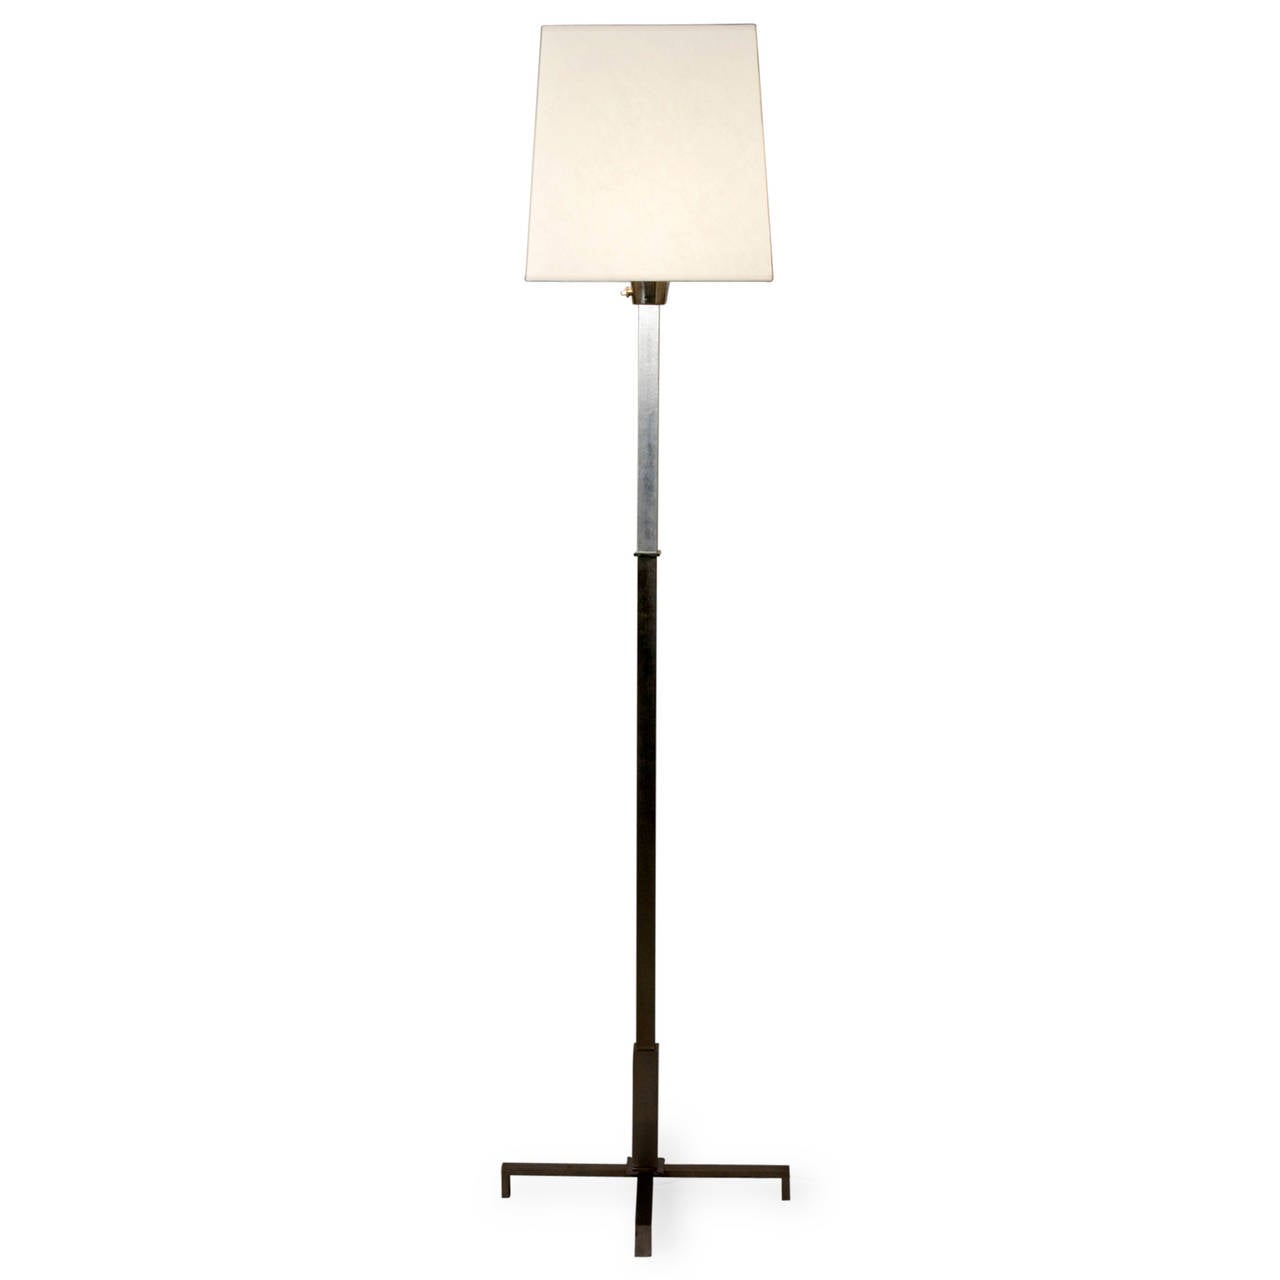 Cruciform base polished steel floor lamp, having a square column and base, the top section polished solid aluminum, in custom square shade, French, circa 1970. Overall height to top of shade 72 in. Shade measures top 12 in square, bottom 14 in